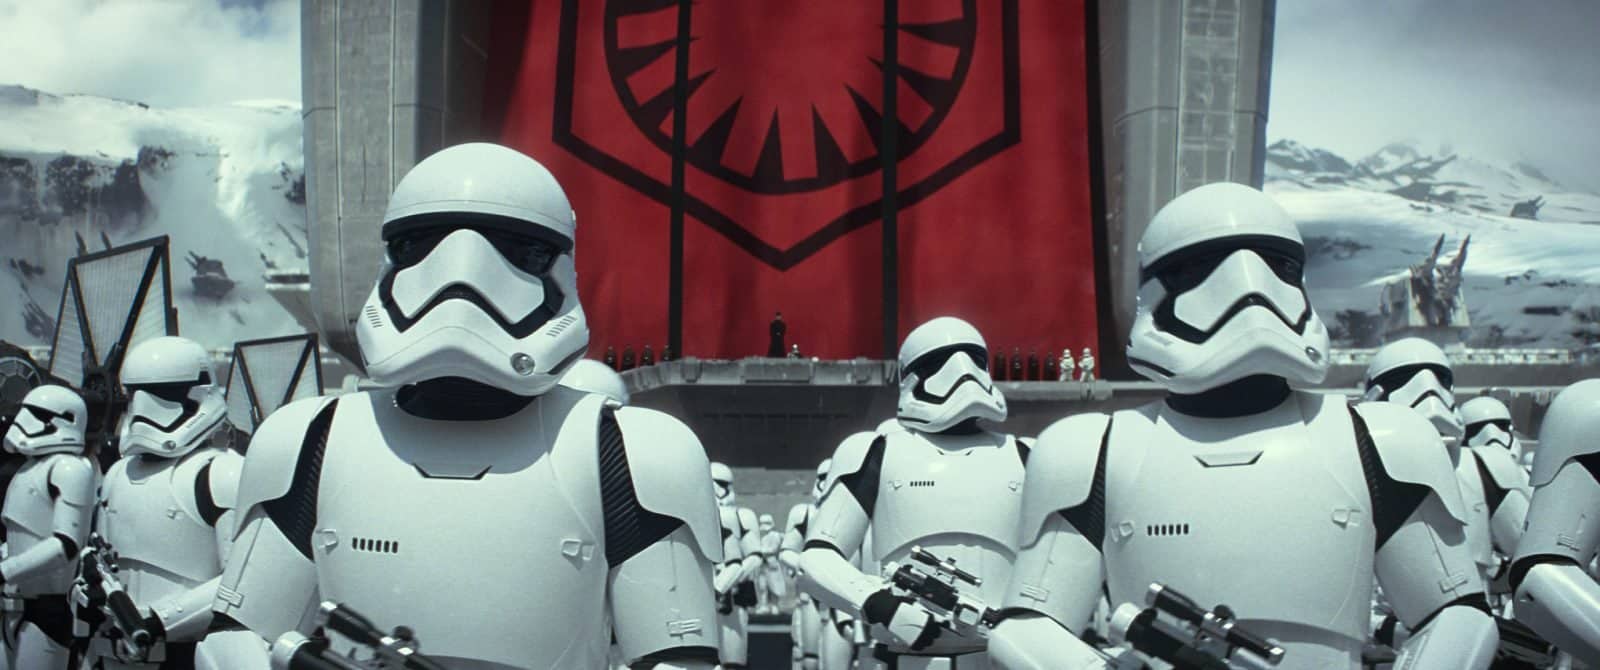 Star Wars VII The Force Awakens 26 - Stormtroopers gather